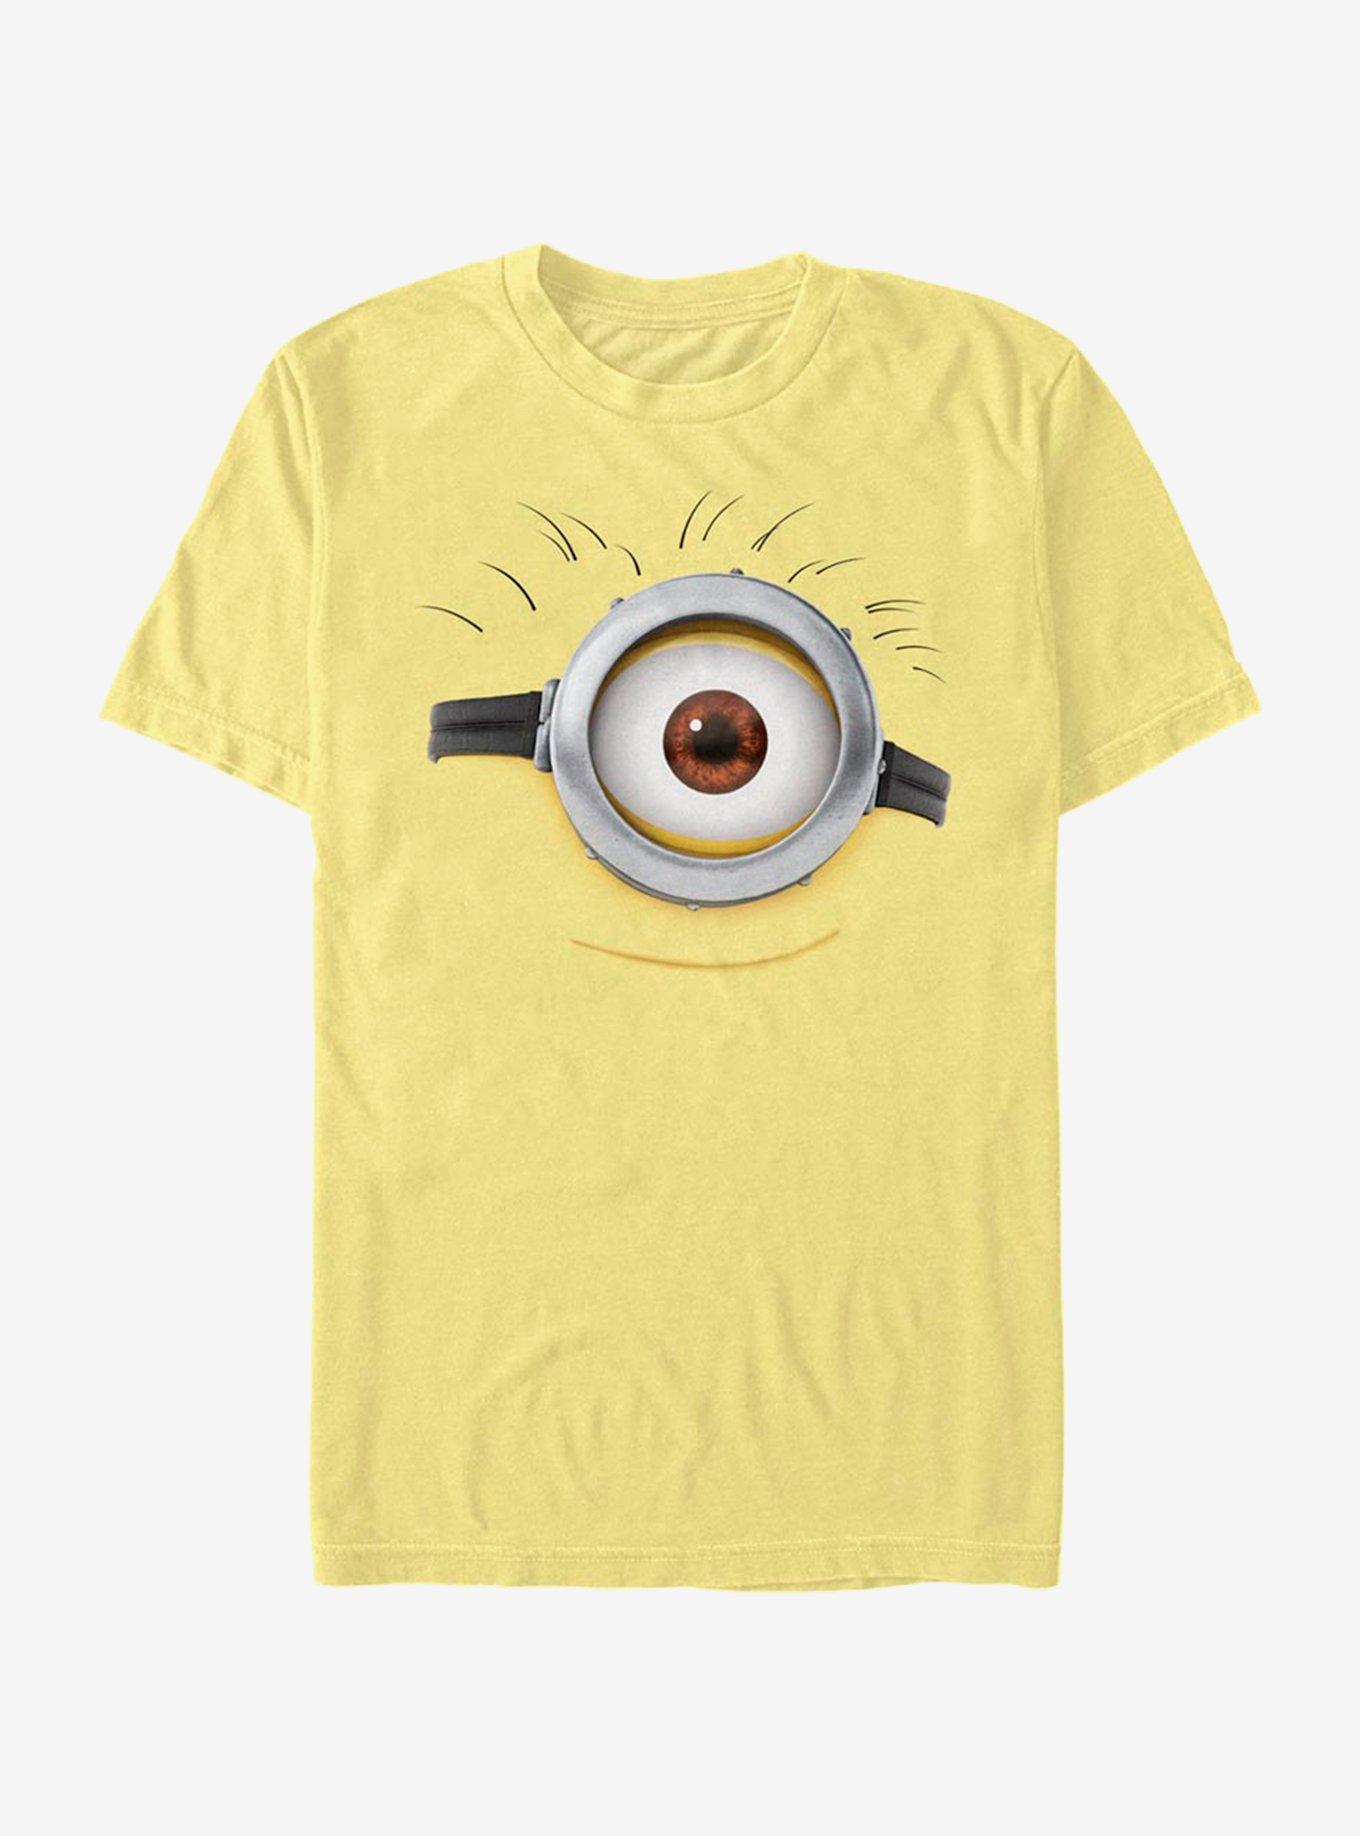 Minions Smile Face T-Shirt - YELLOW | BoxLunch